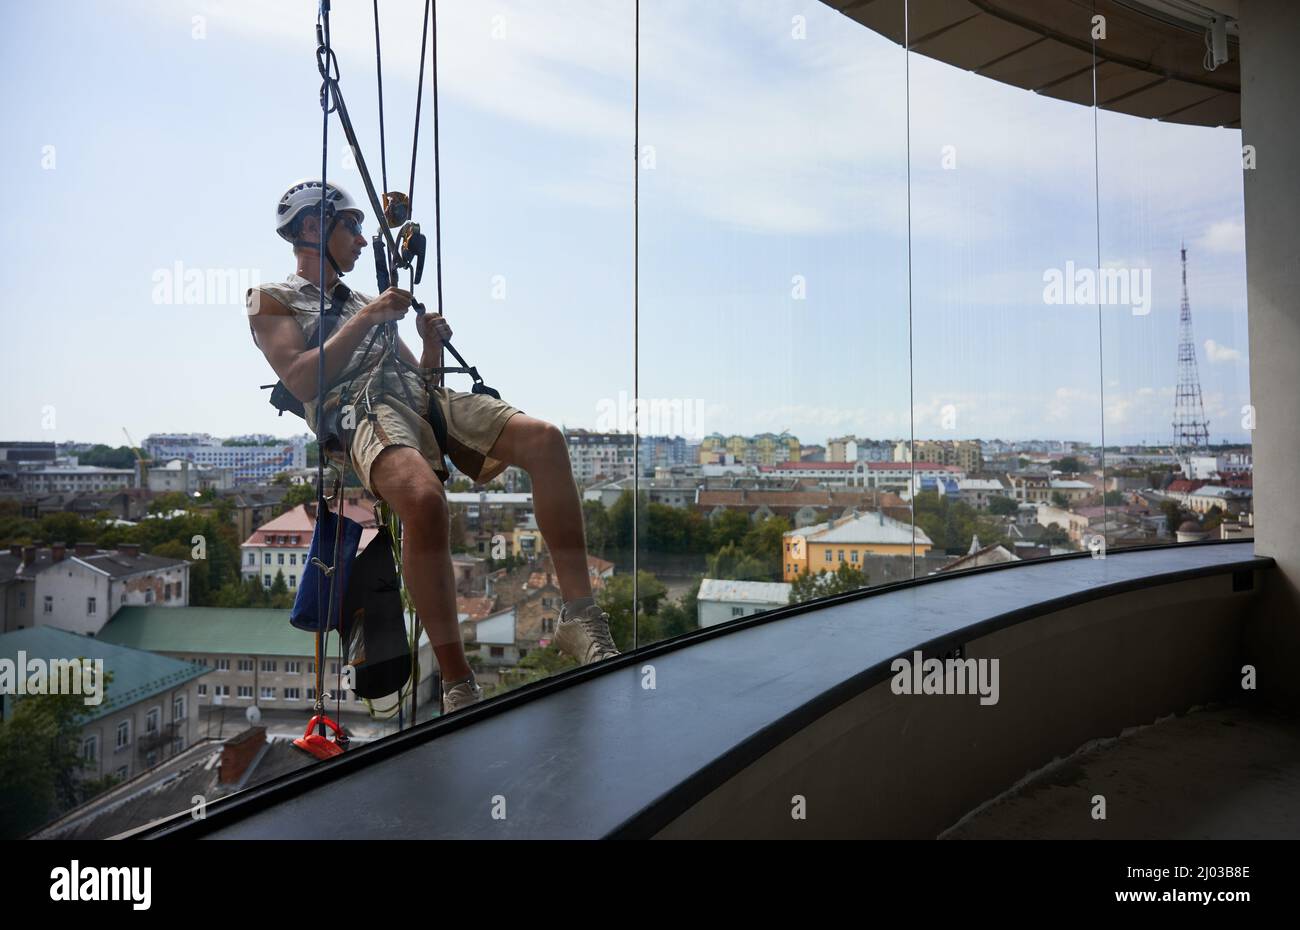 Industrial mountaineering worker hanging on rope and wiping window. View from inside building. Cleaner using safety lifting equipment while cleaning glass of high-rise building. Stock Photo